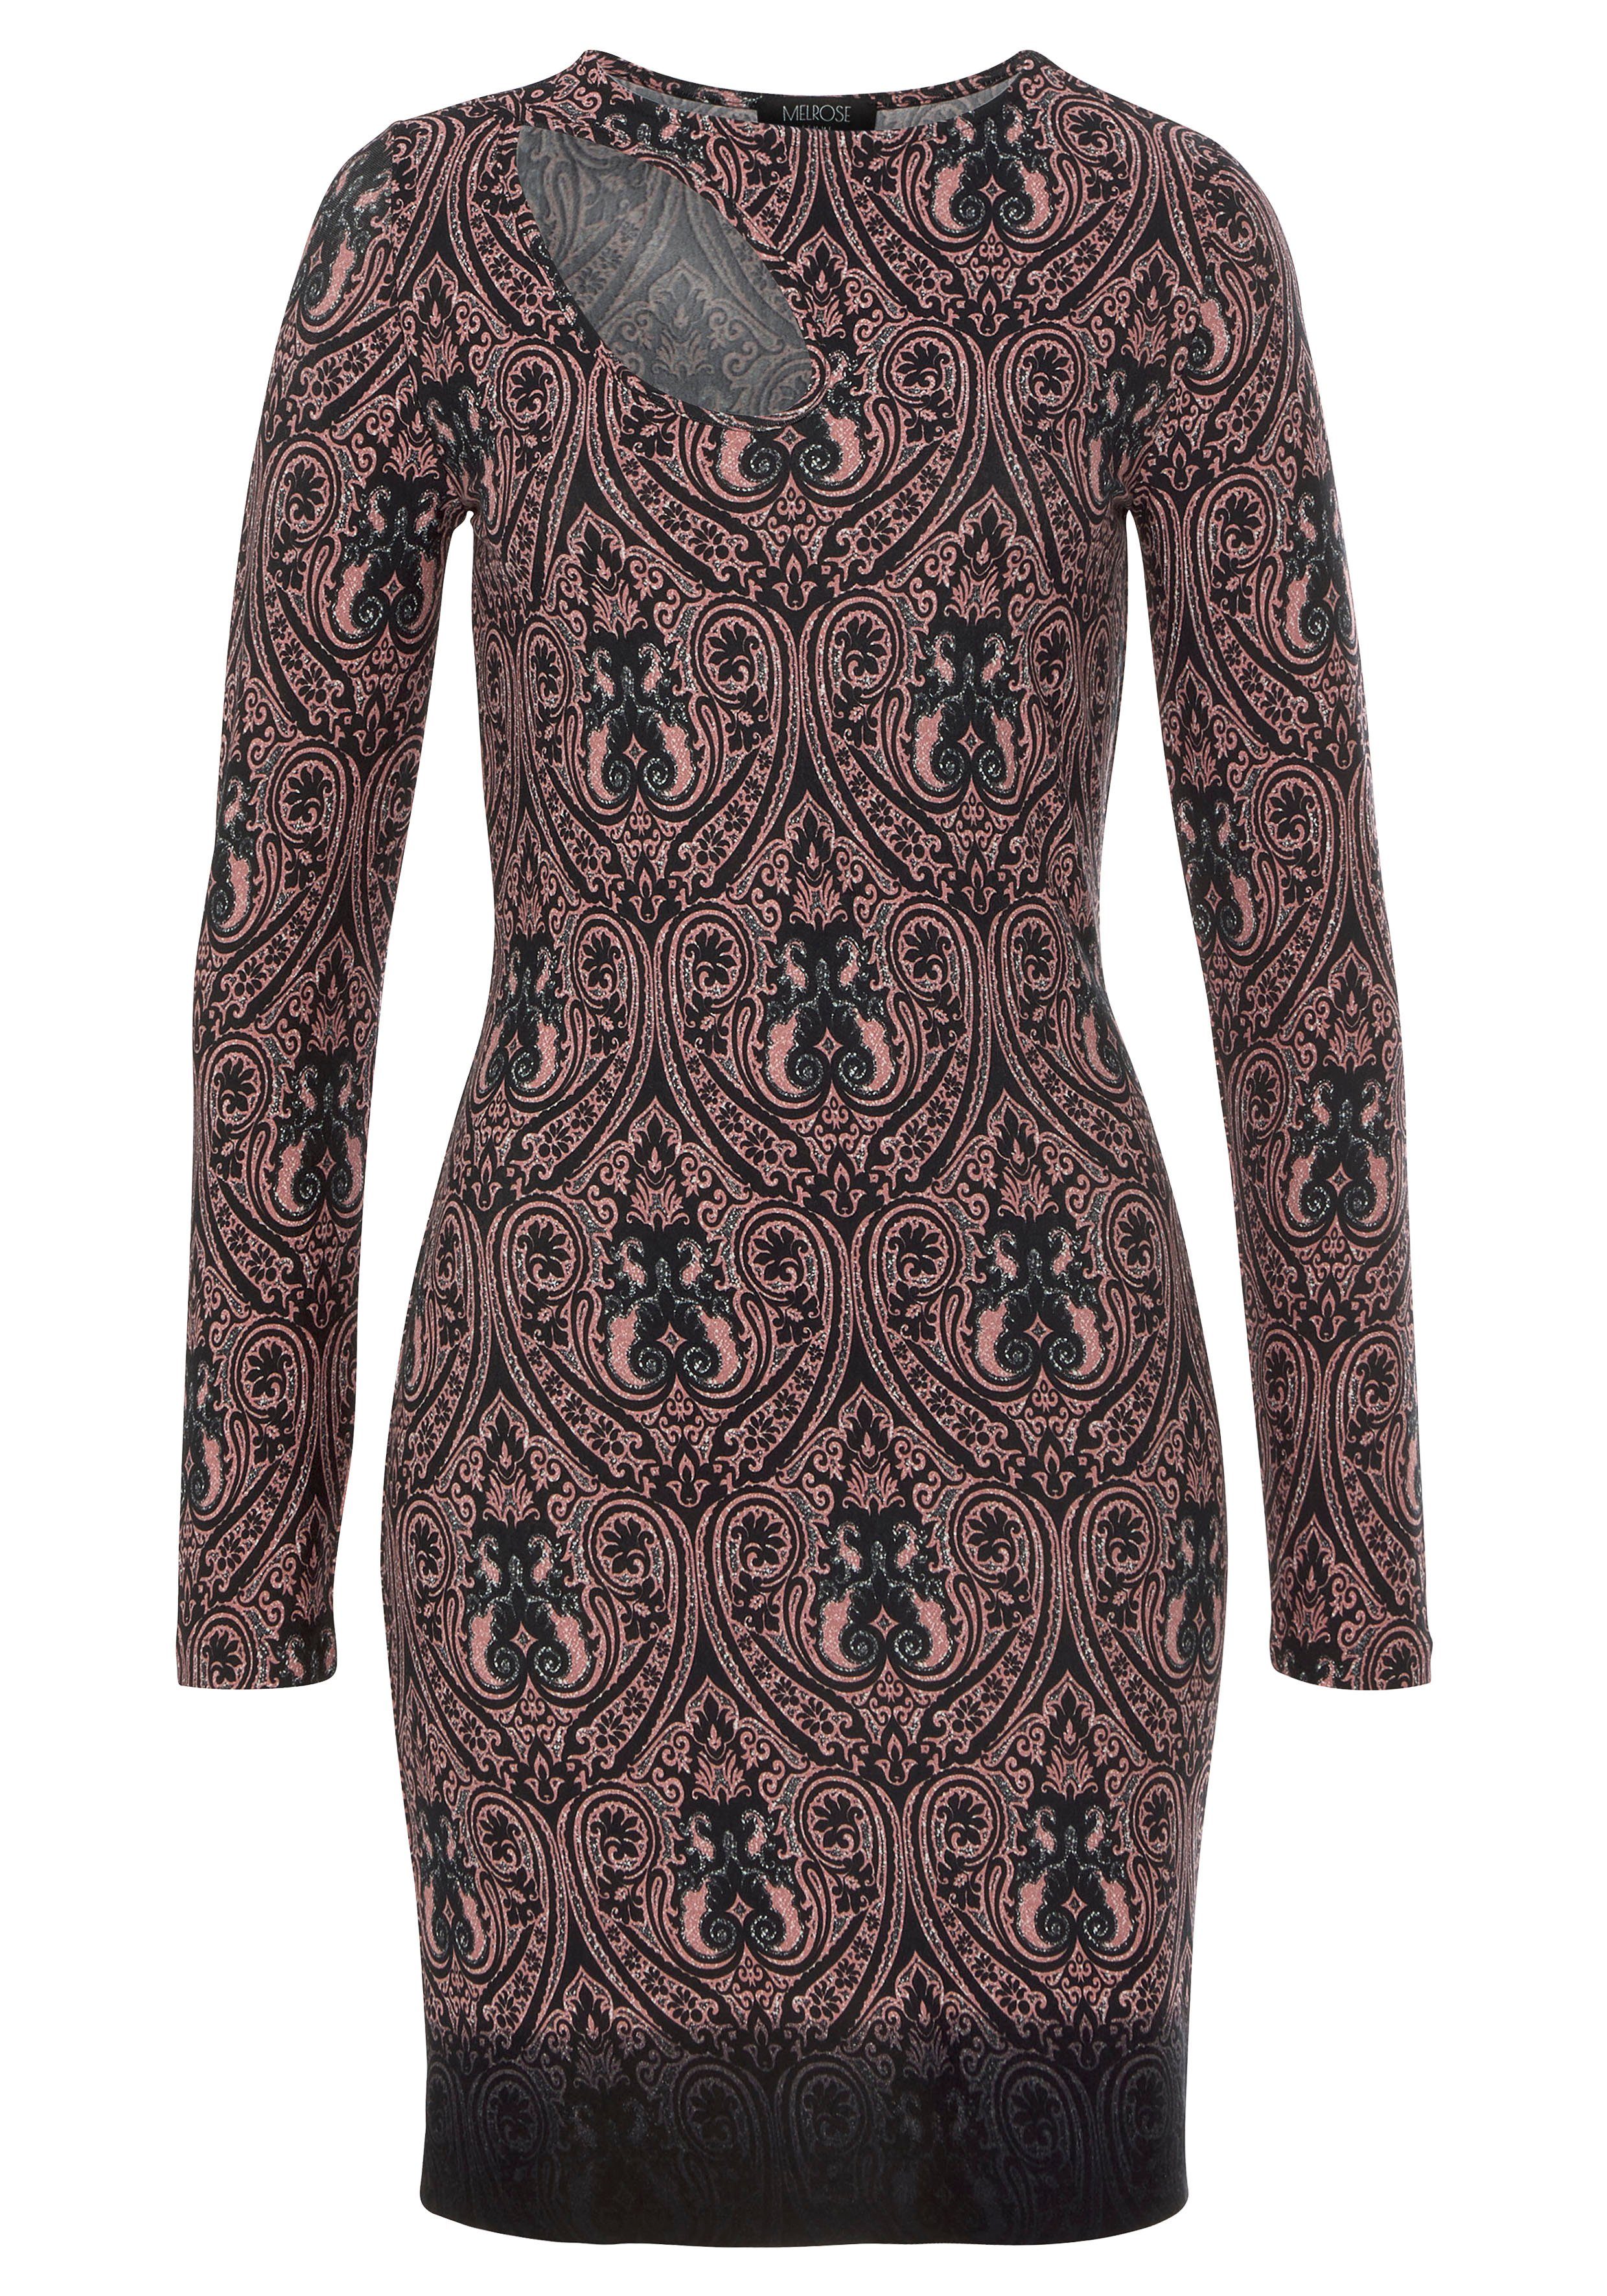 und Cut-Out mit Melrose Paisley-Muster Jerseykleid